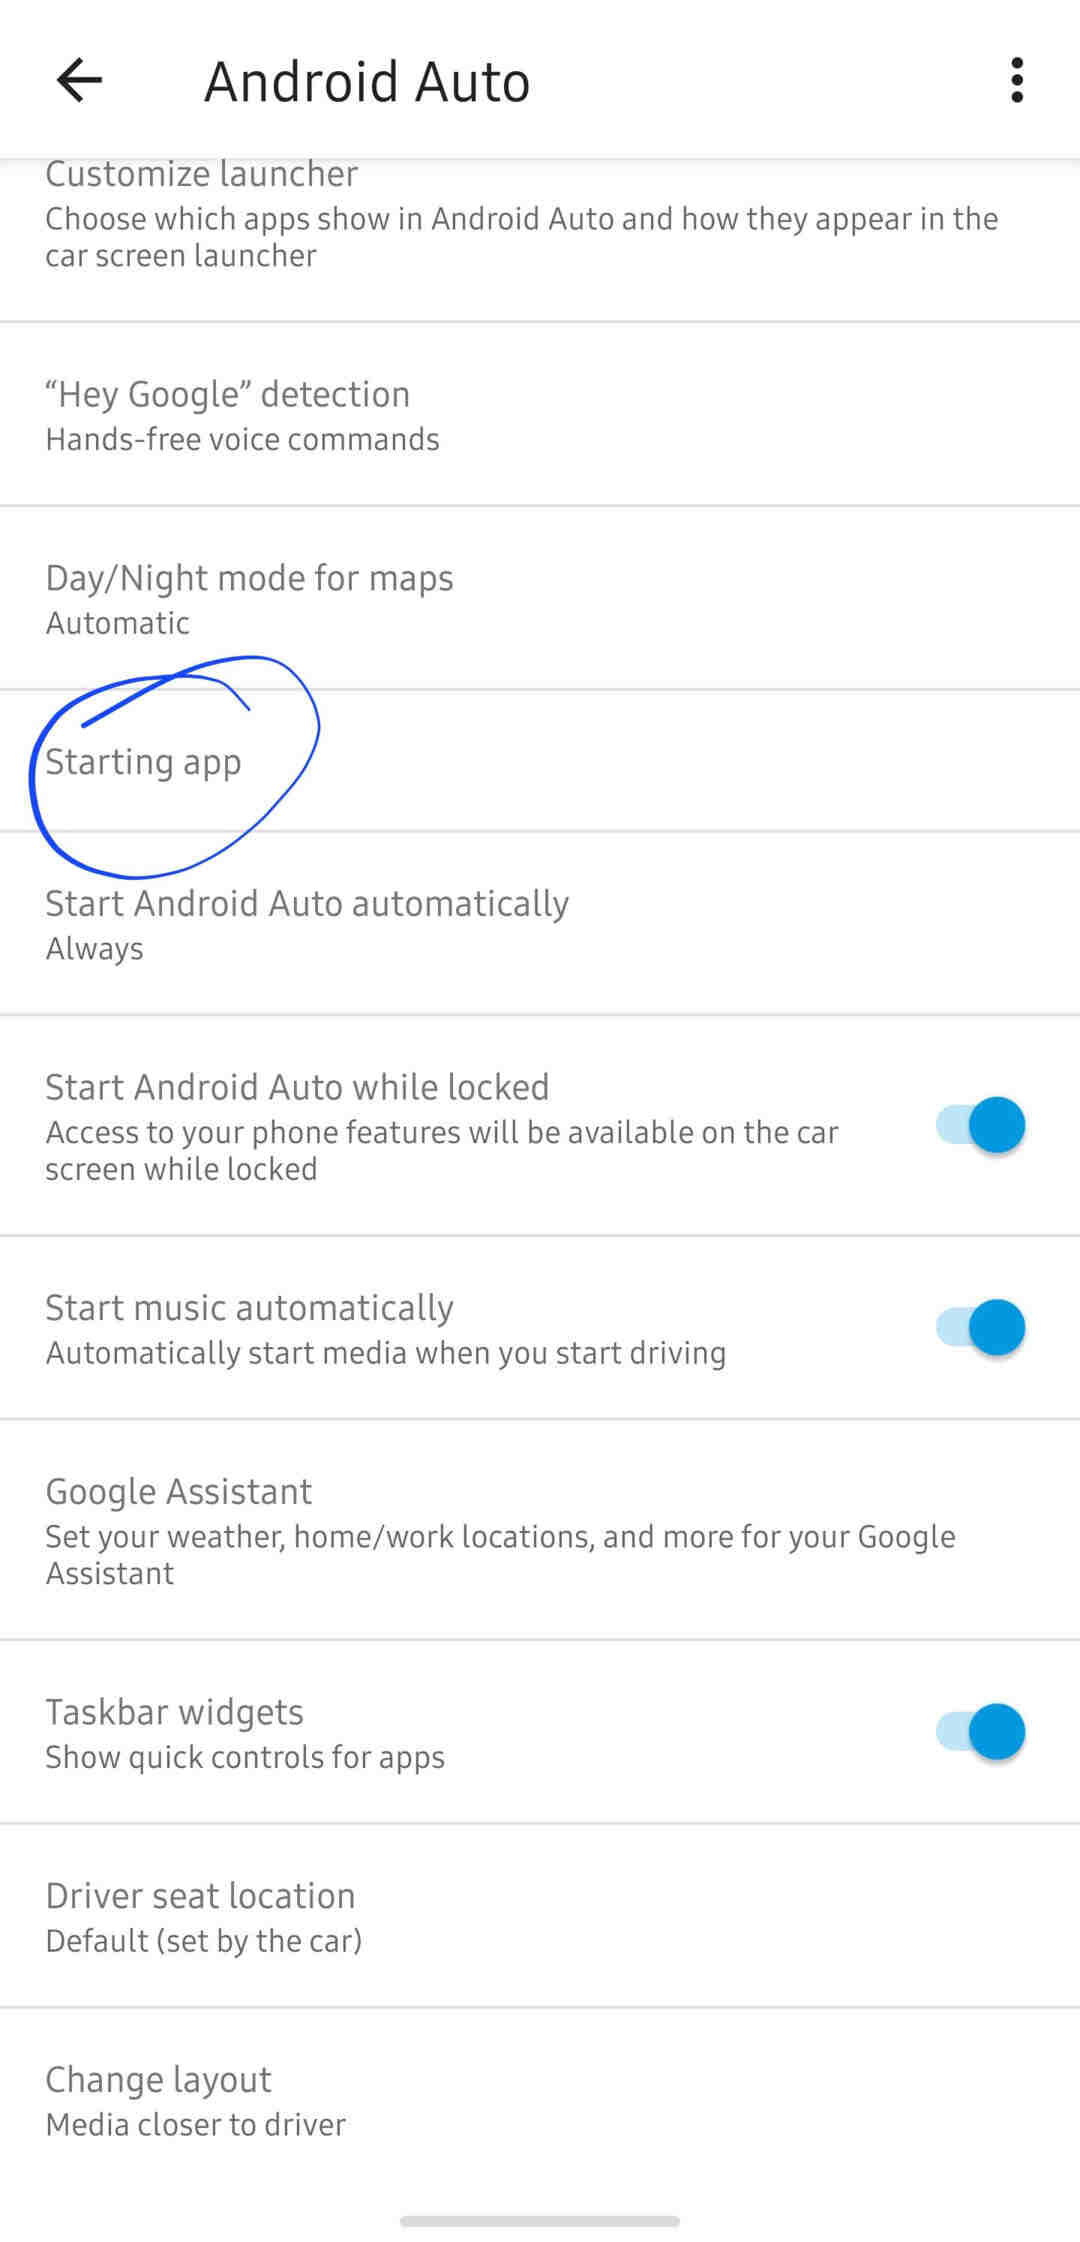 Android Auto 9.3 stable update